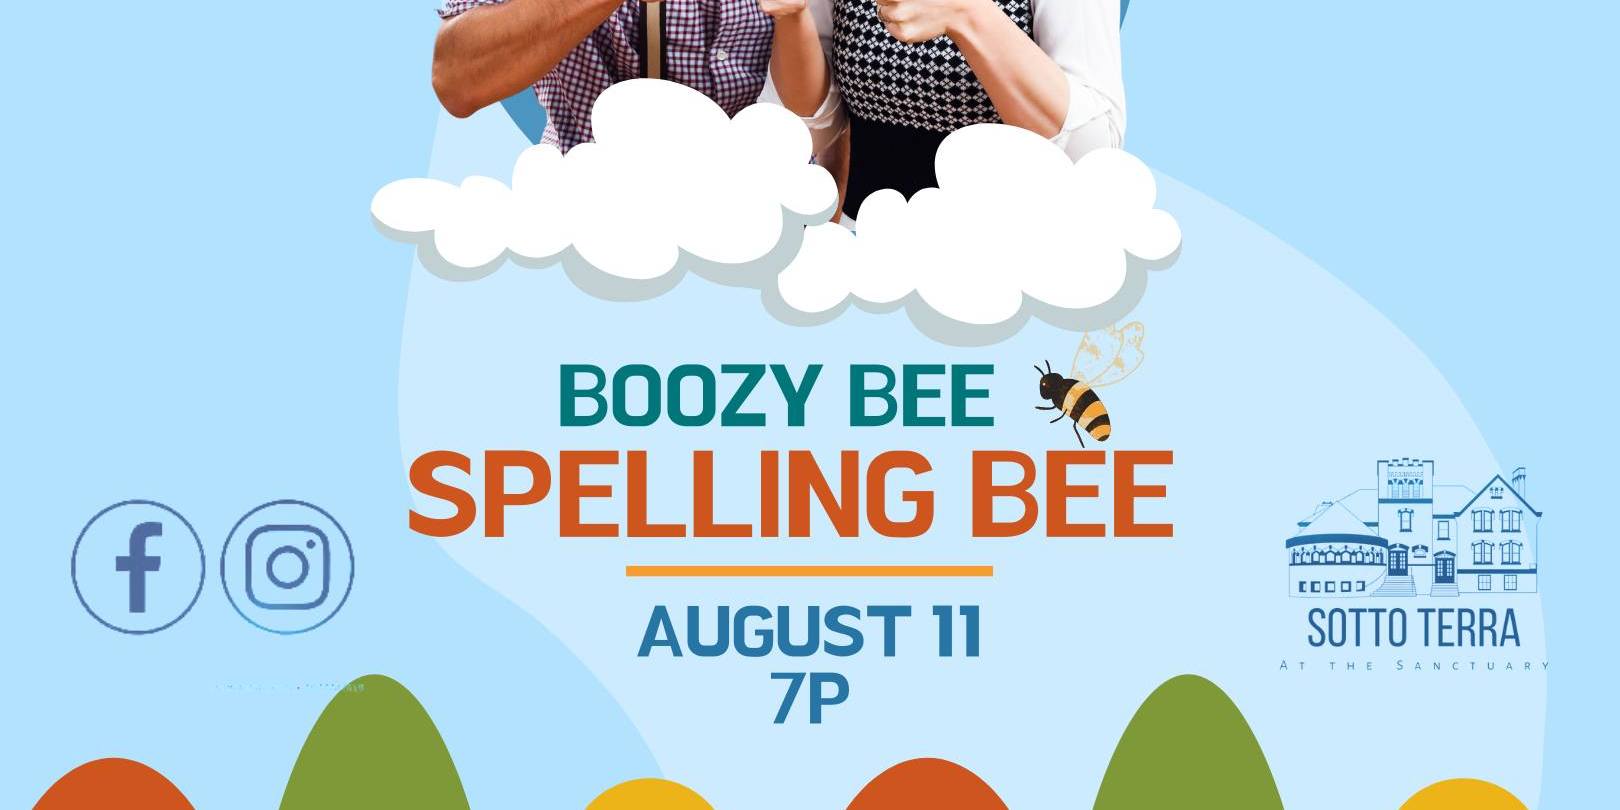 BOOZY BEE! Spelling Bee at Sotto Terra promotional image